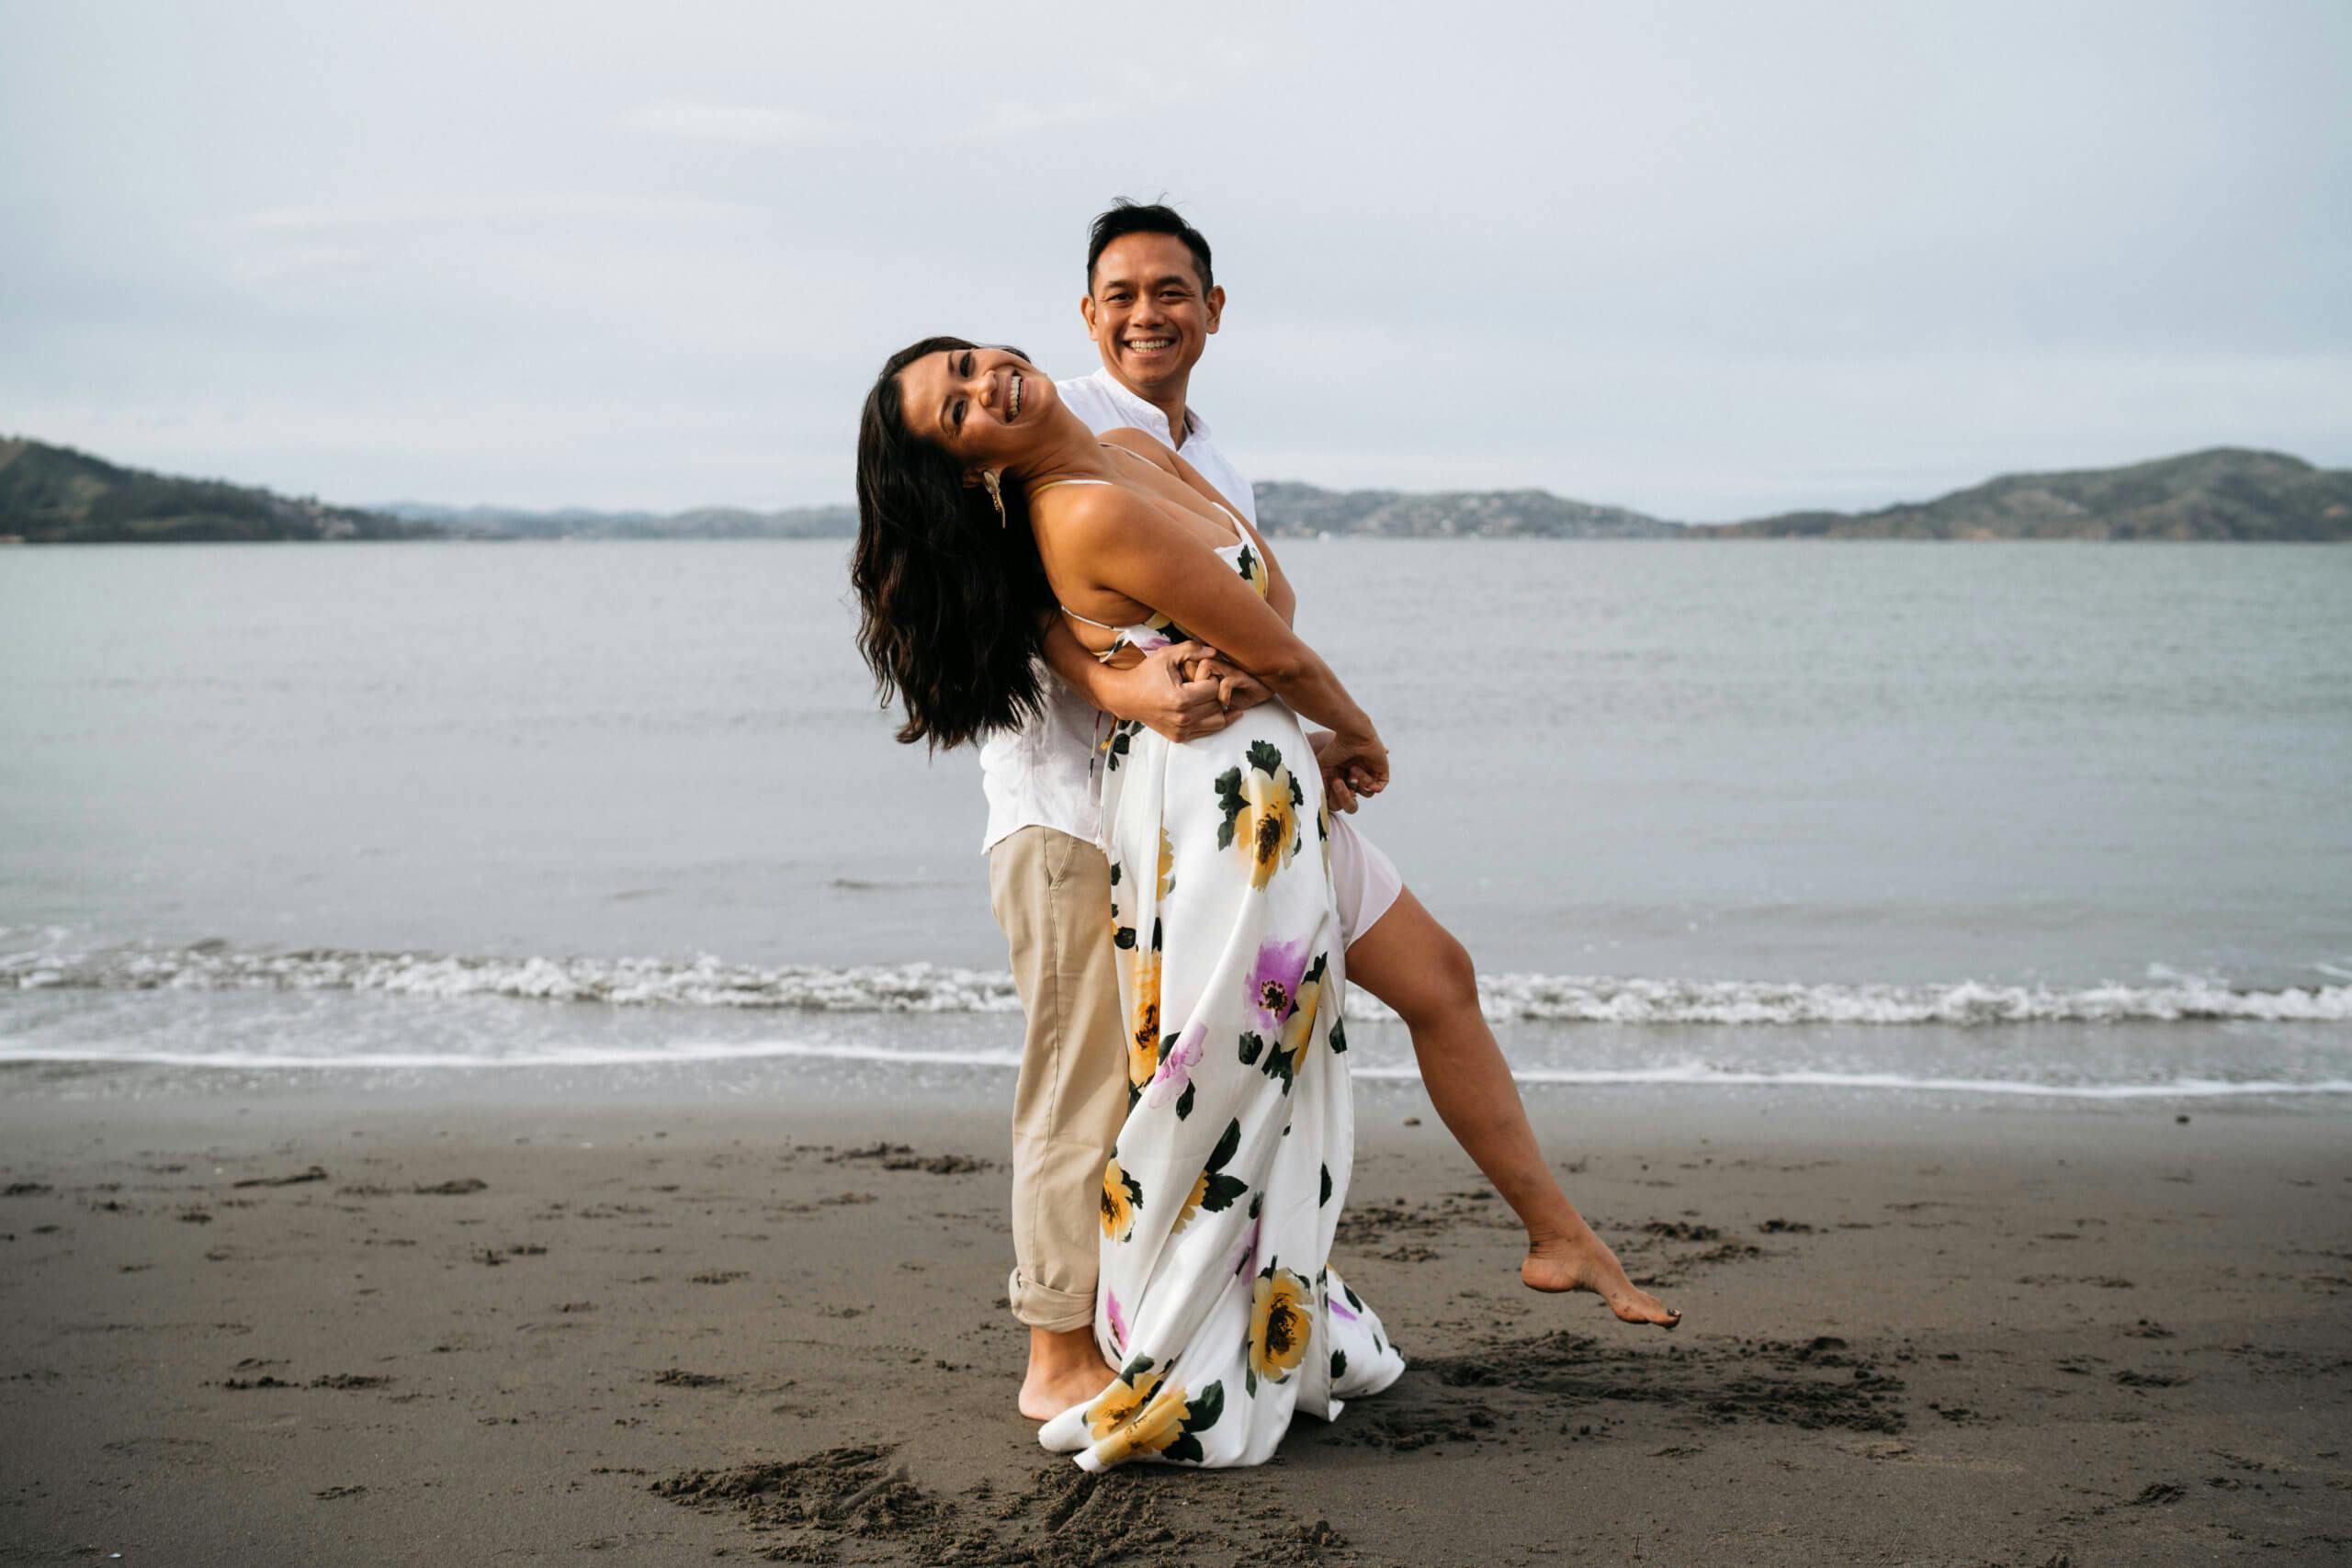 A smiling couple dancing on the beach with hills across the water.